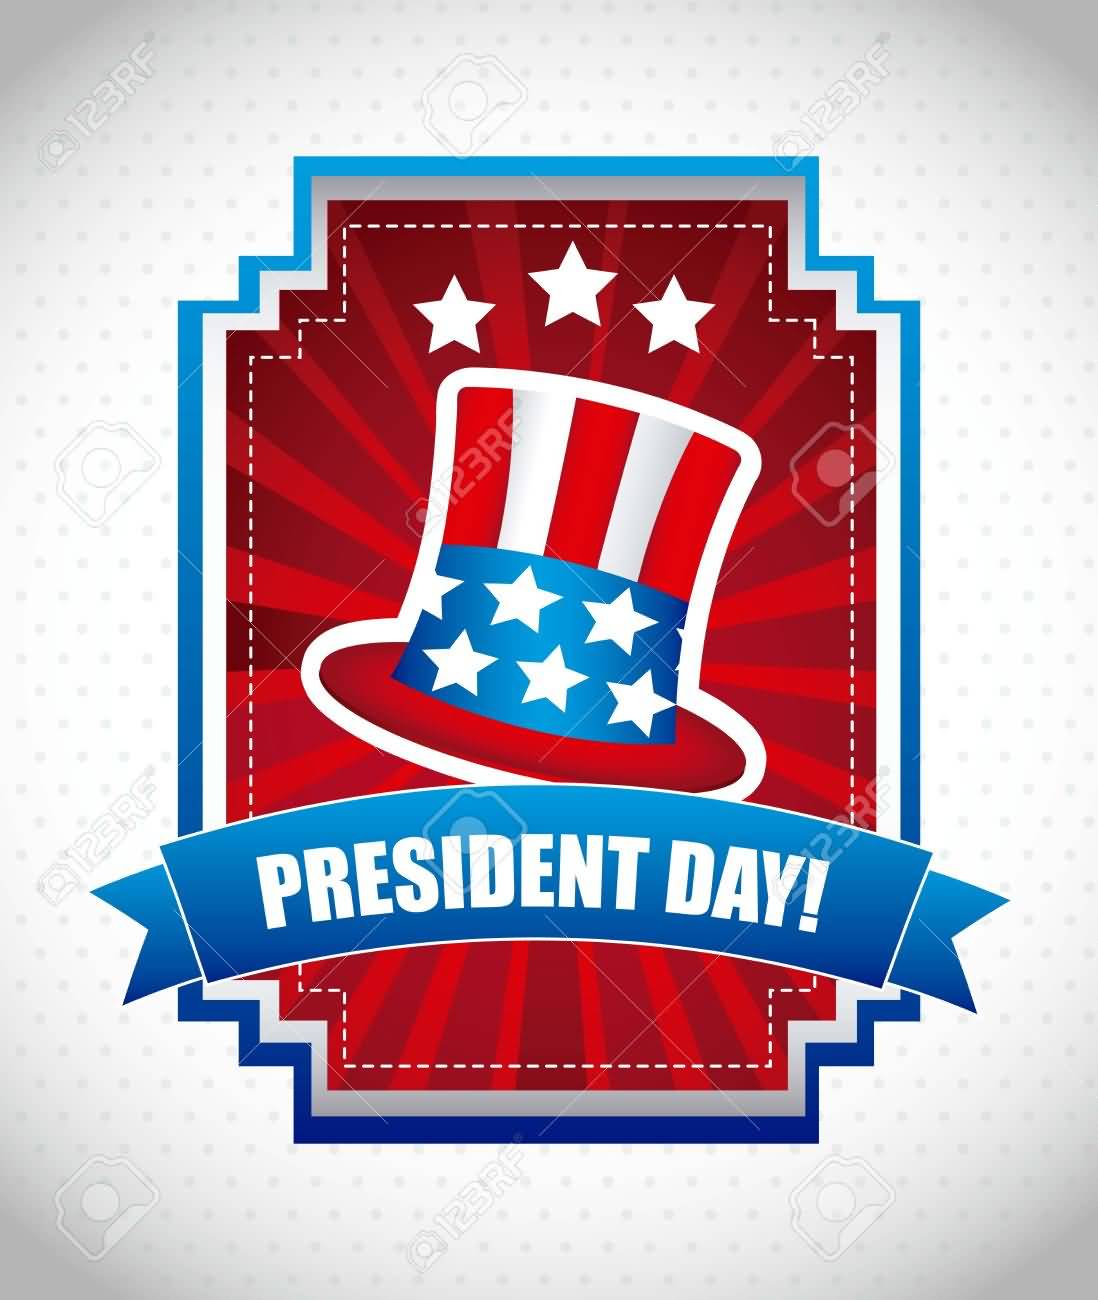 President Day Wishes Card